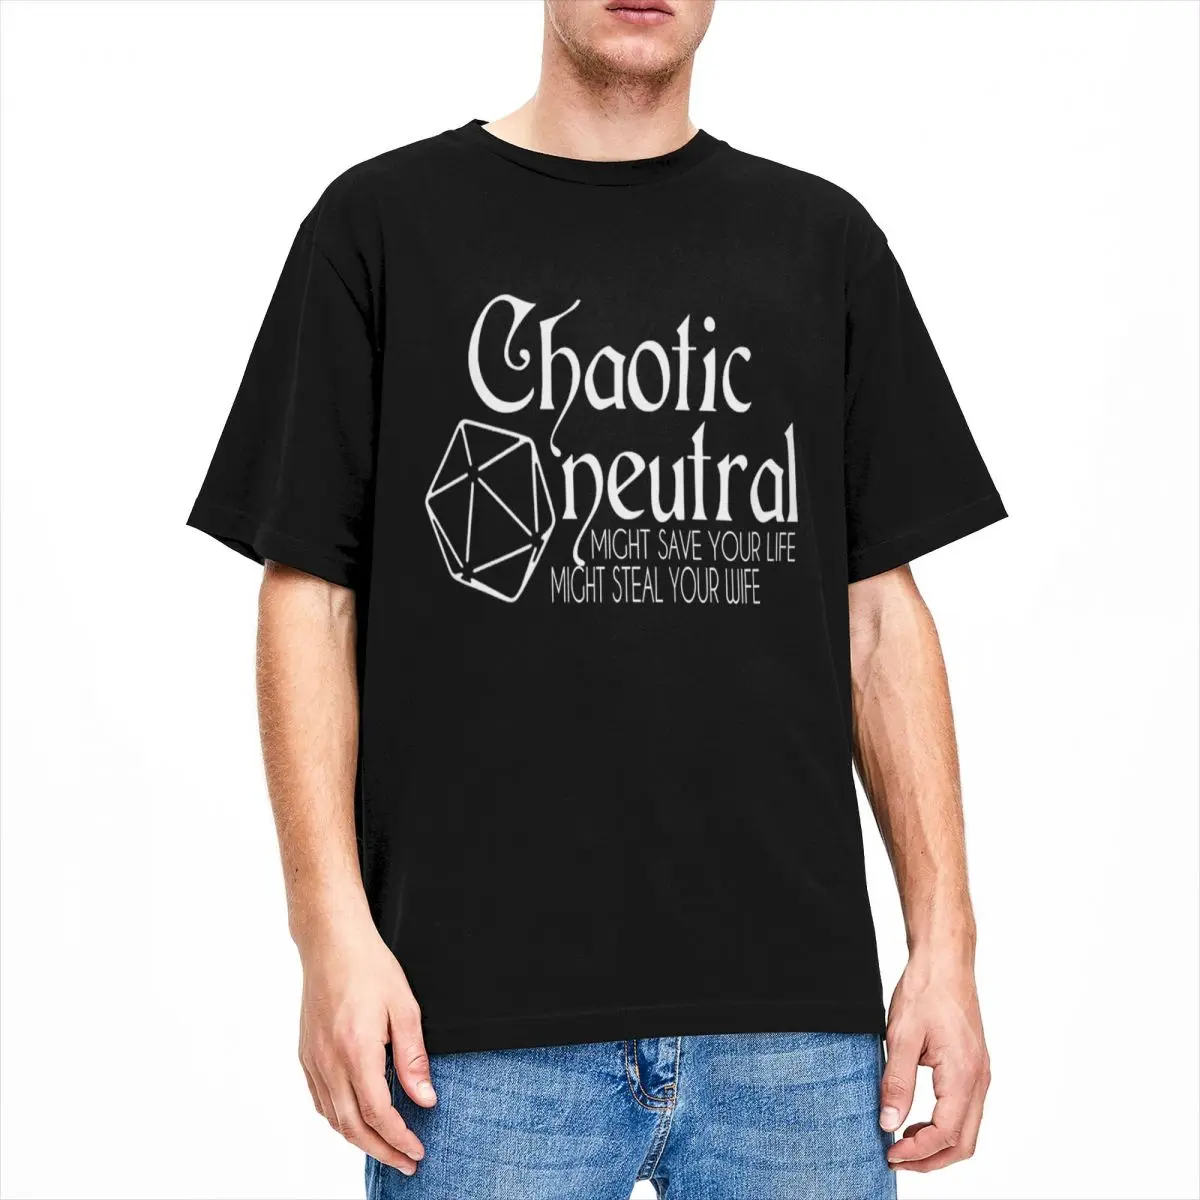 

Chaotic Neutral Might Save Your Life Might Steal Your Wife T Shirt Accessories Cotton Funny Tee Shirt Graphic Printed T-Shirt